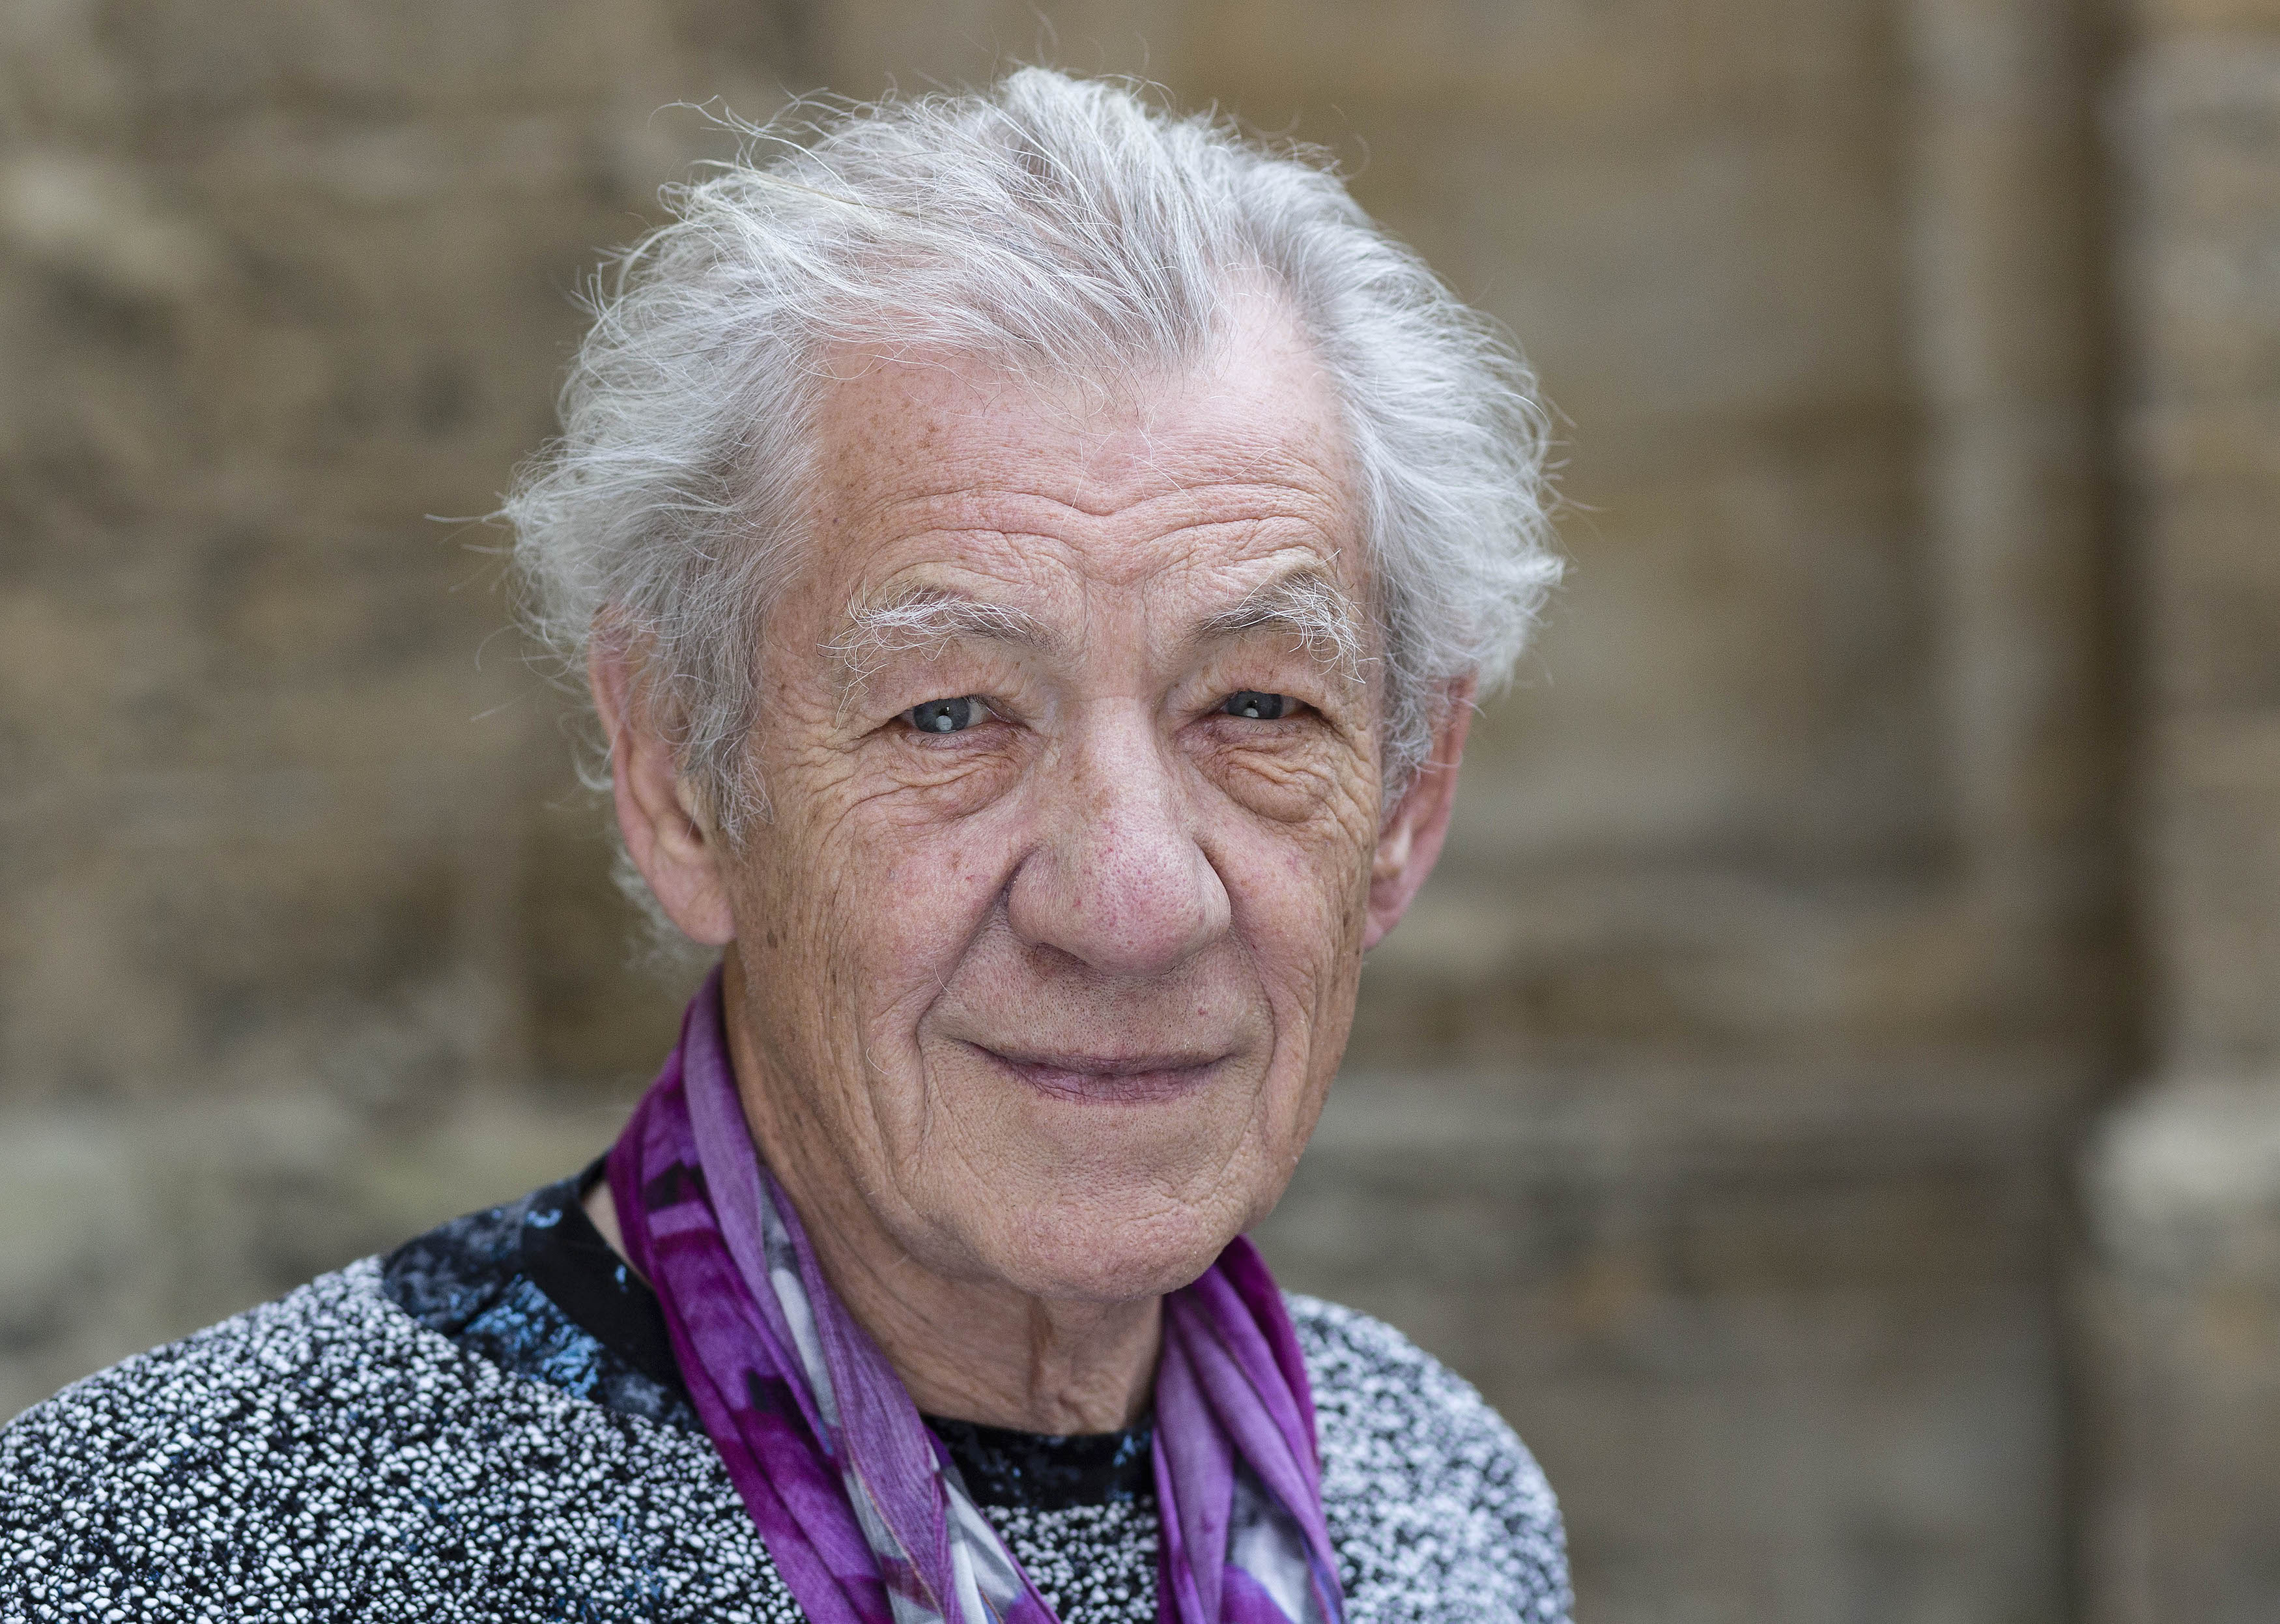 ian Mckellen Delivers Apology For Kevin Spaceybryan Singer Comments  Indiewire